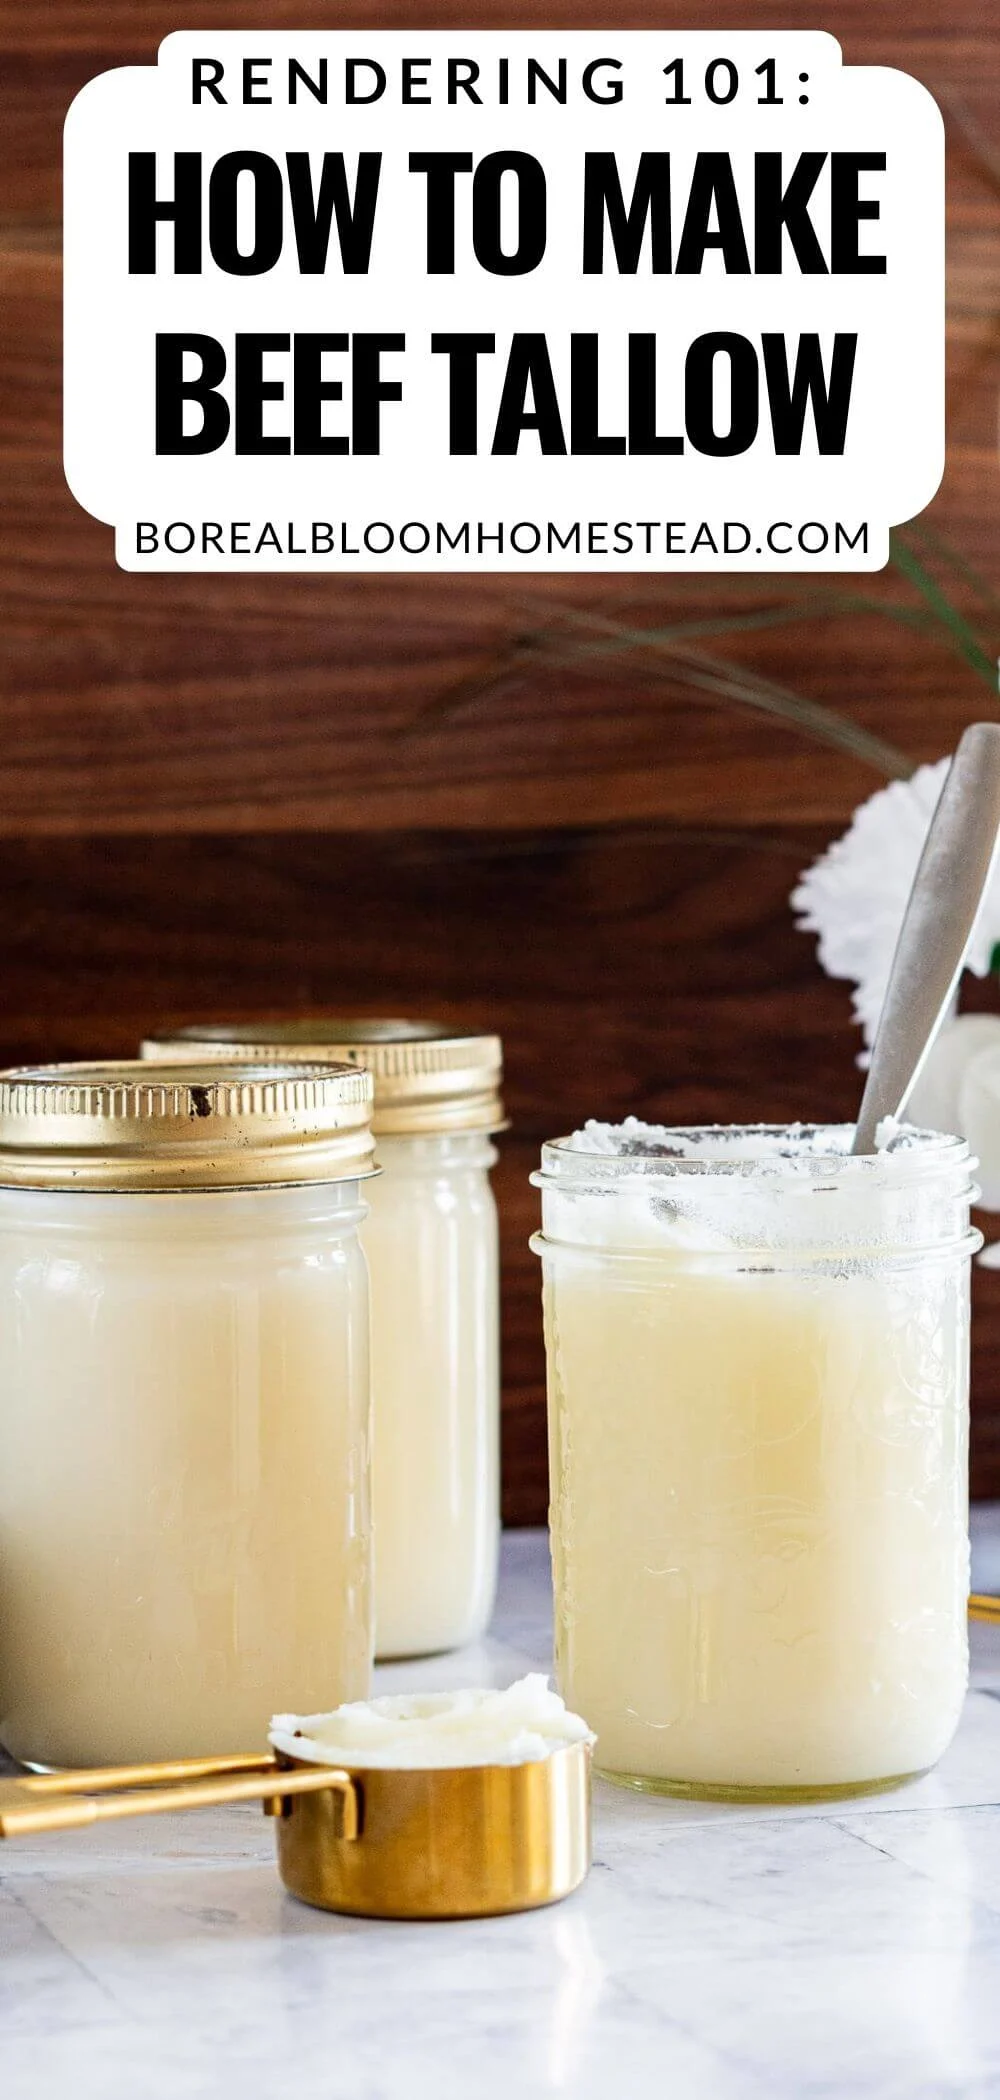 How to make beef tallow at home pinterest graphic.